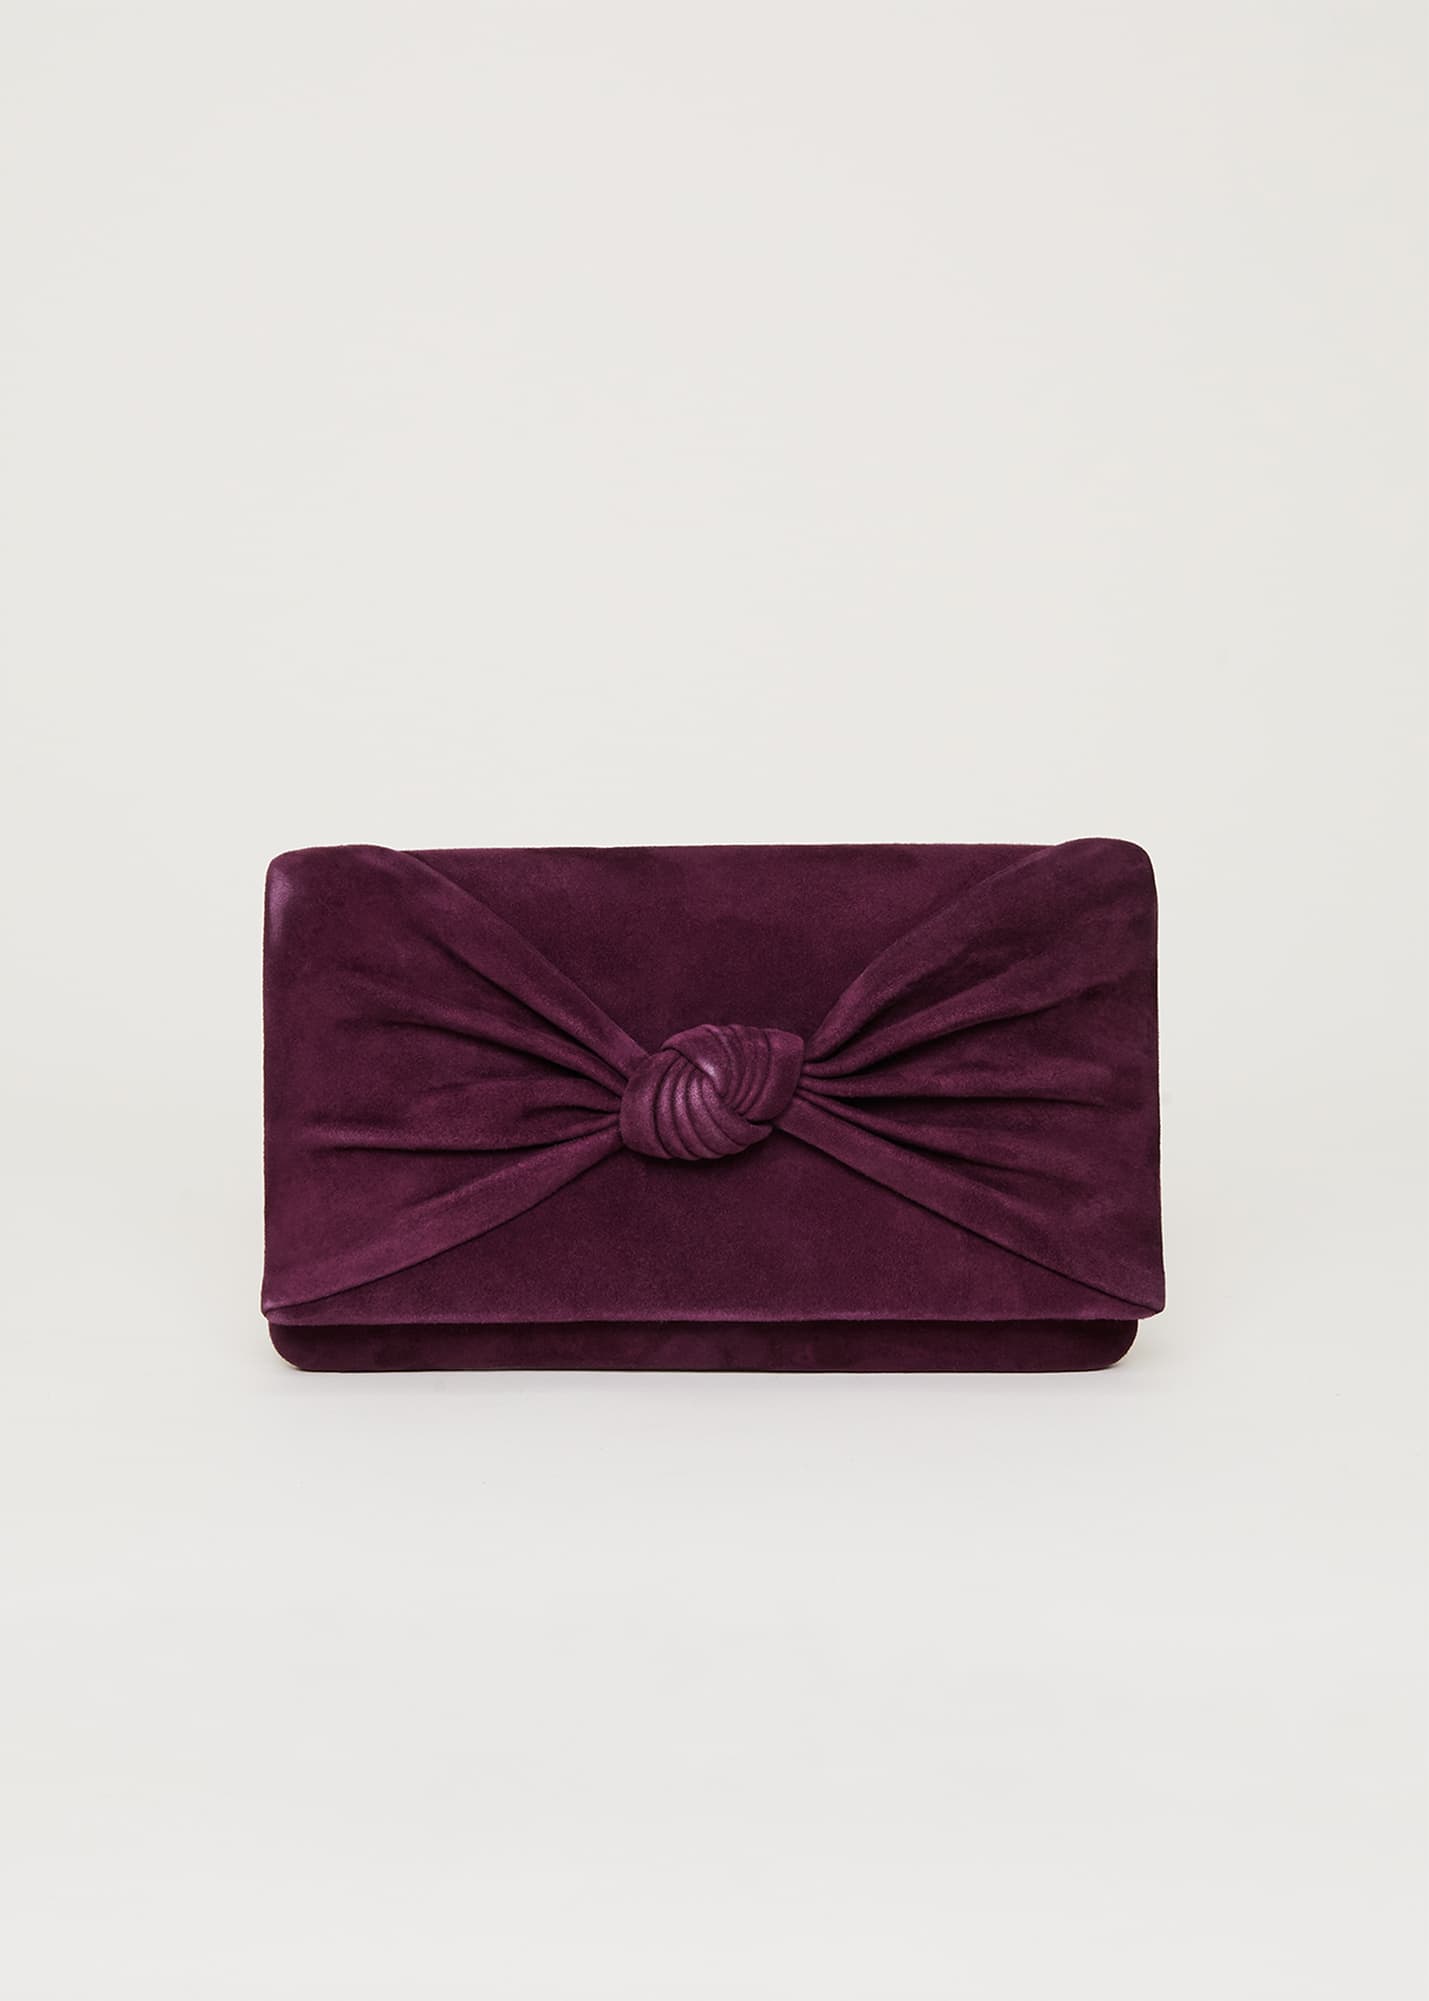 Phase Eight Women's Knot Front Clutch Bag